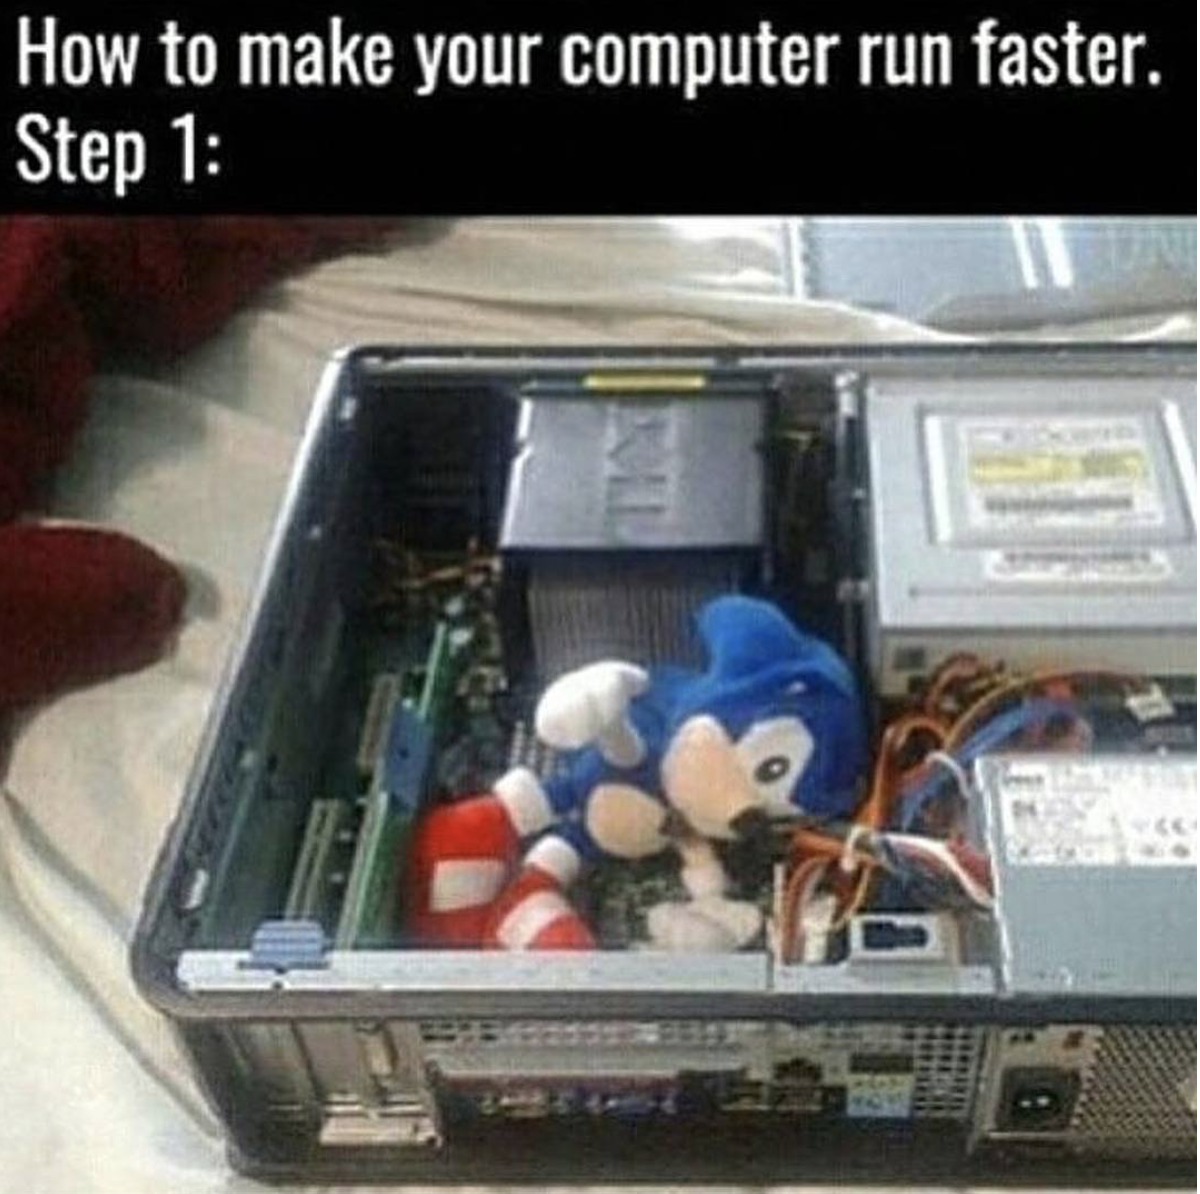 meme stream - make a computer faster meme - How to make your computer run faster. Step 1